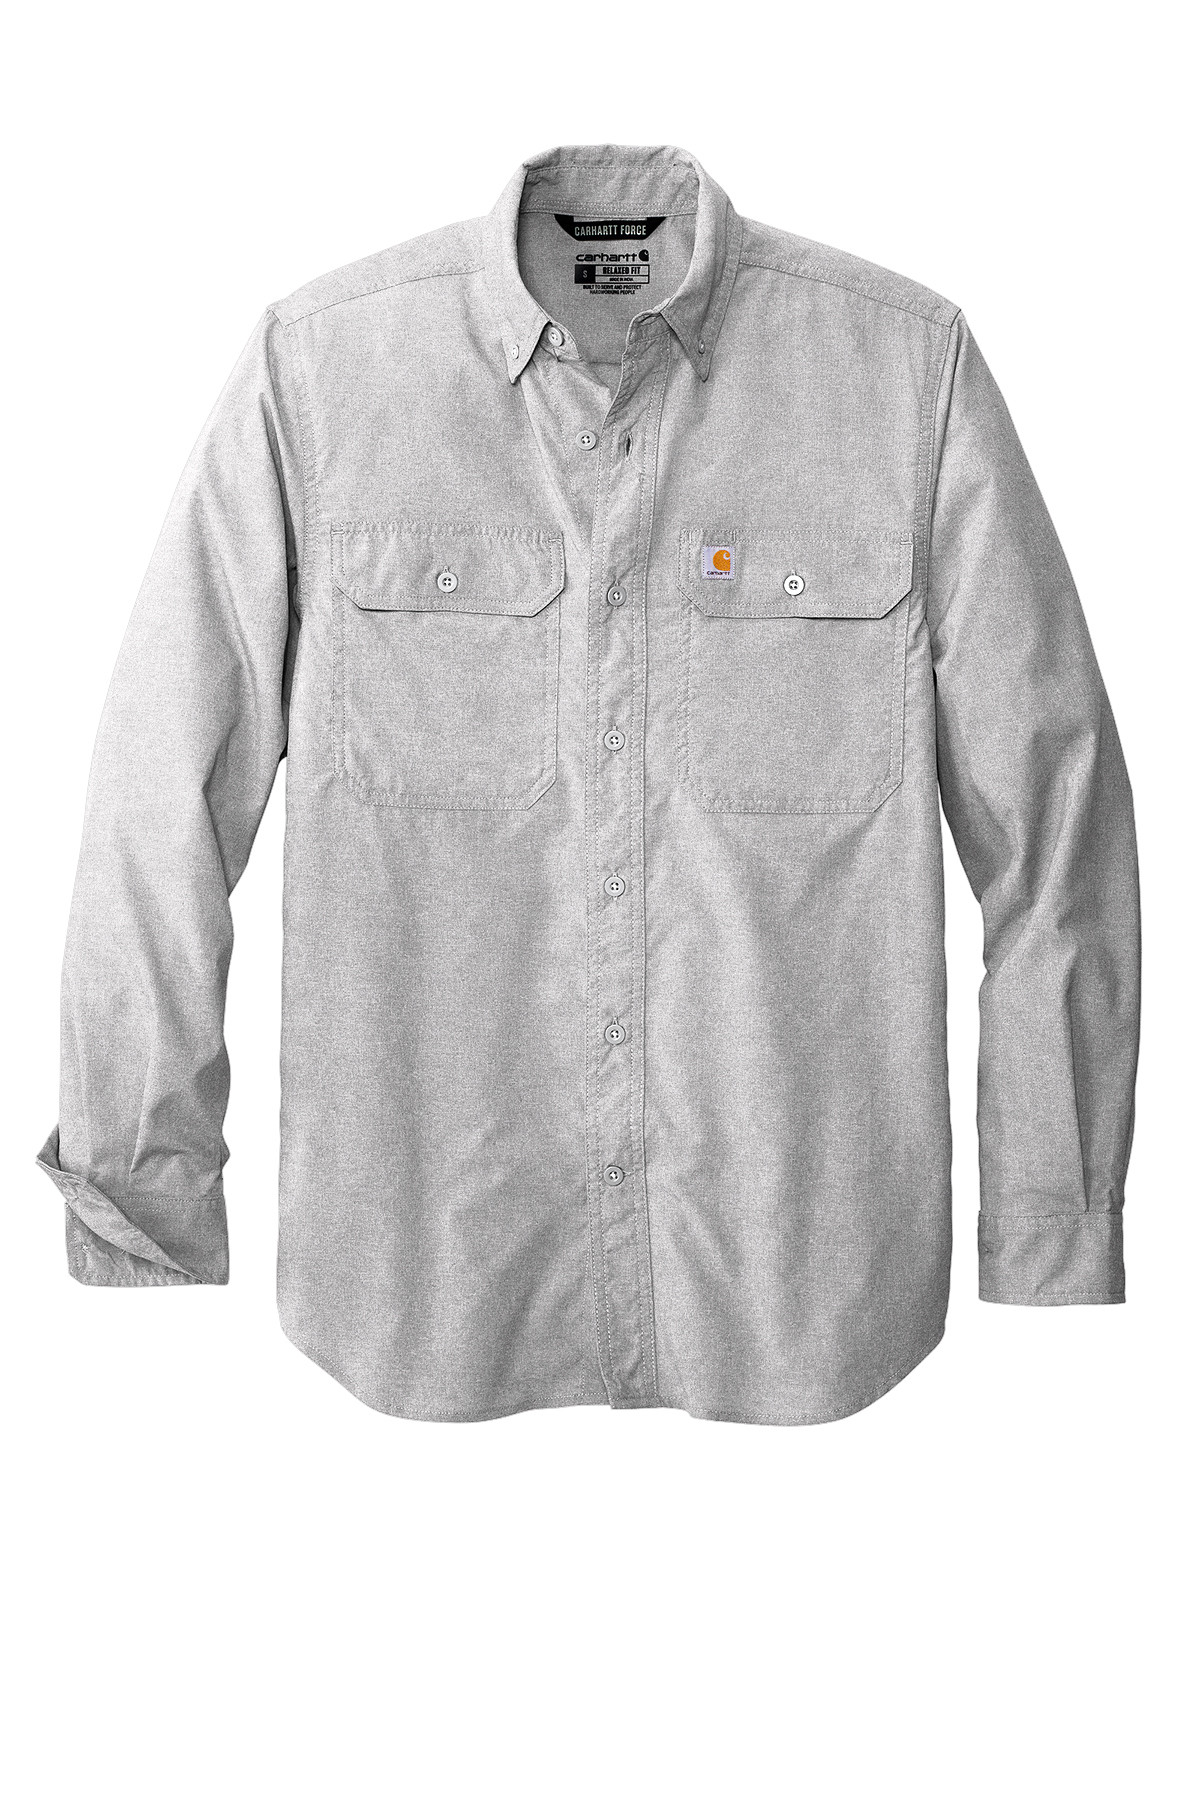 Carhartt Force Solid Long Sleeve Shirt, Product